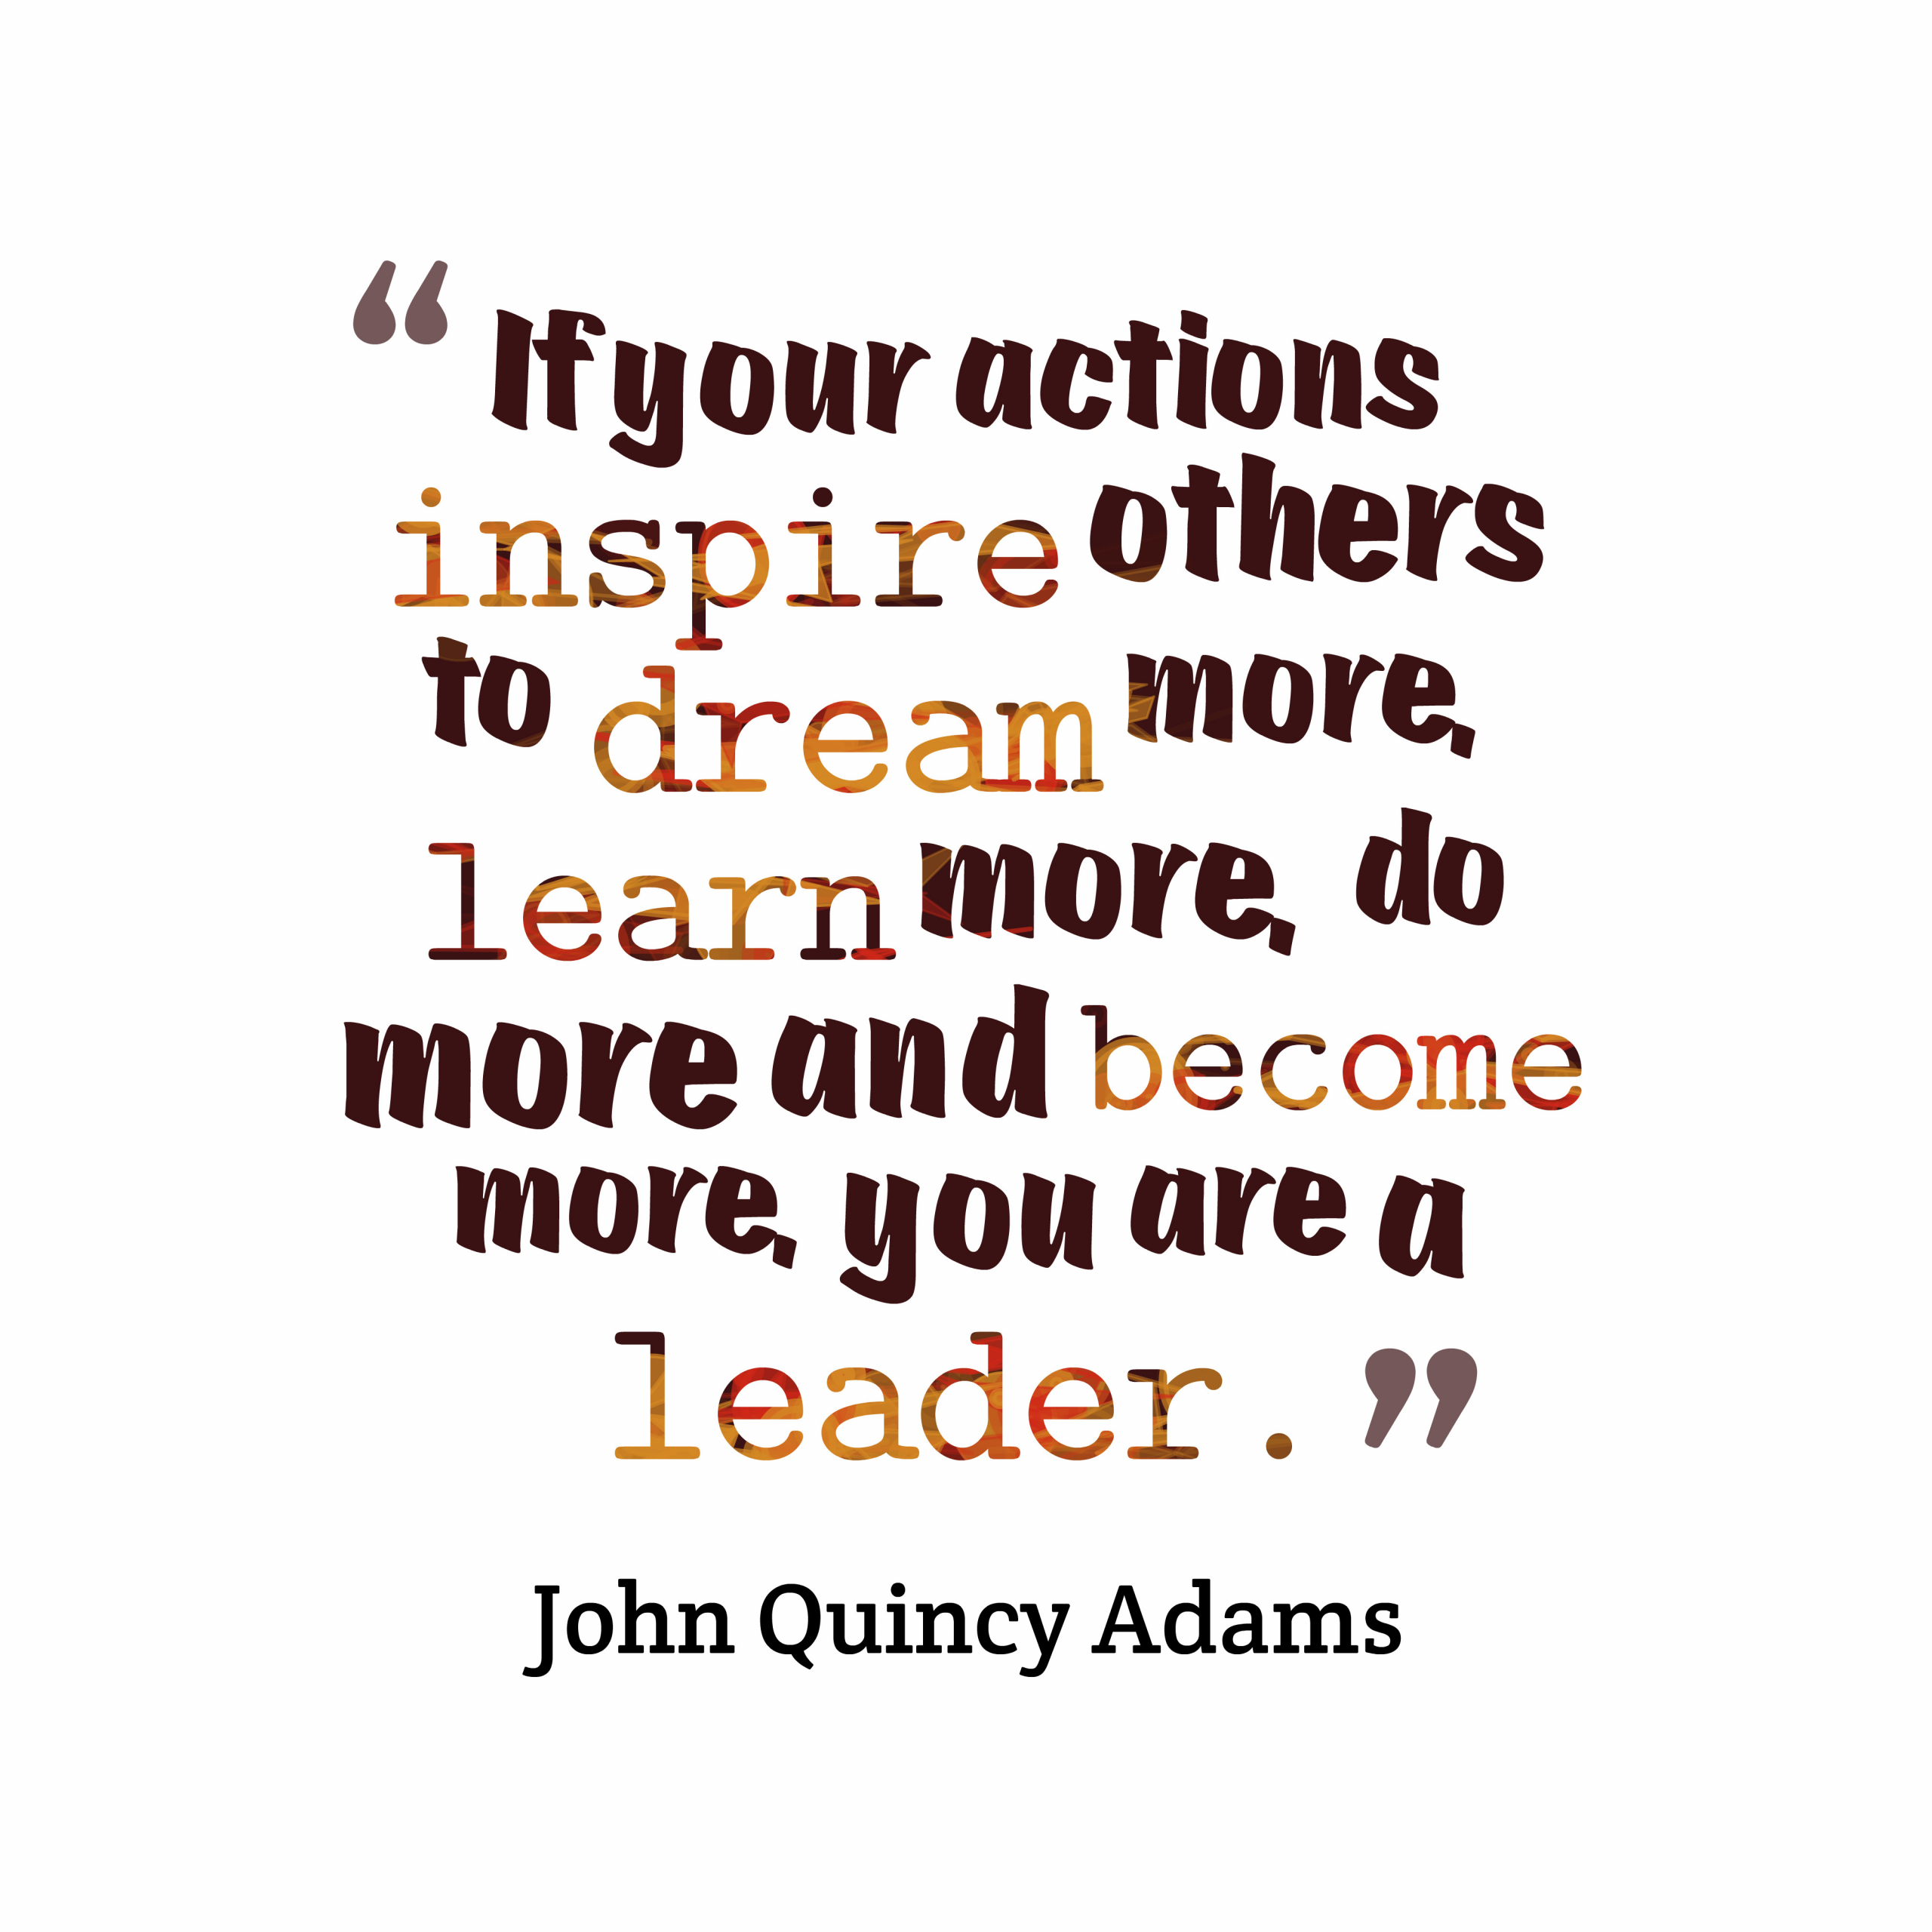 John Adams Quotes On Leadership
 The Leader In Me Call for Quotes and Words of Inspiration